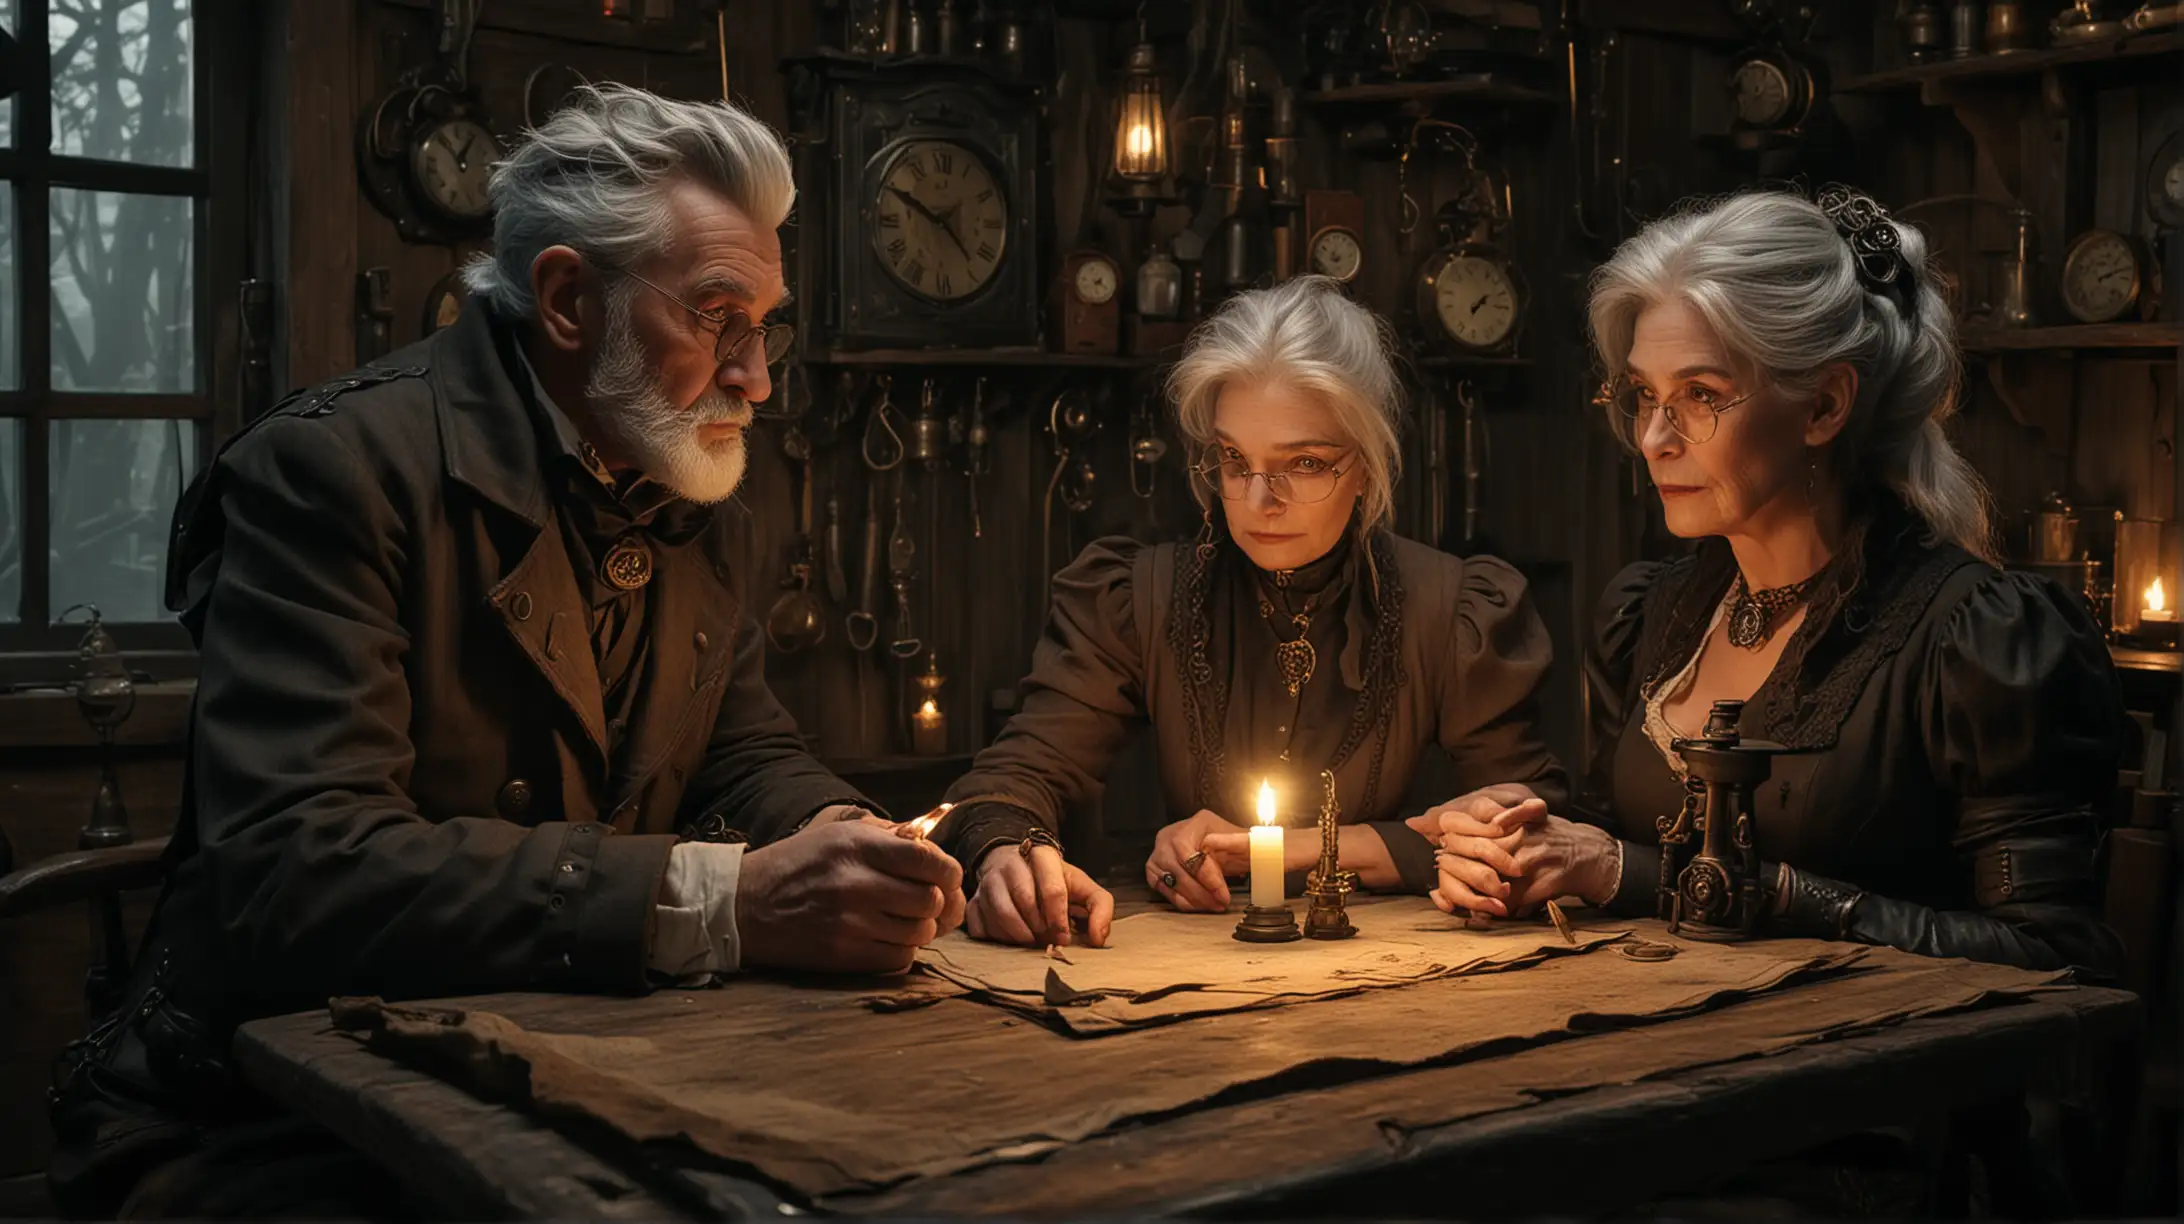 Elderly Steampunk Couple Contemplate Time in Dimly Lit Cabin